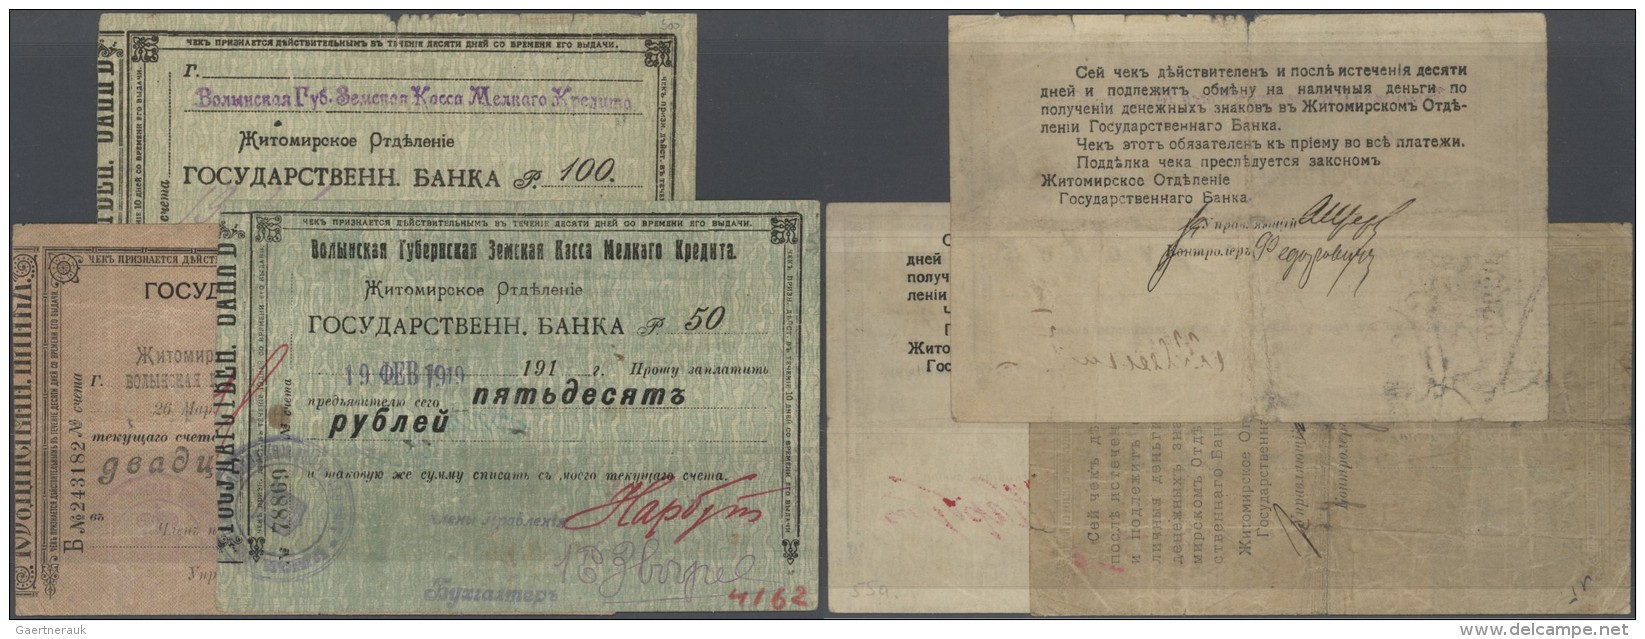 Ukraina / Ukraine: Zhytomyr, Volynsk District Savings Bank For Small Loans Set With 14 Notes Containing 5 X 25, 8 X 50 A - Ucraina